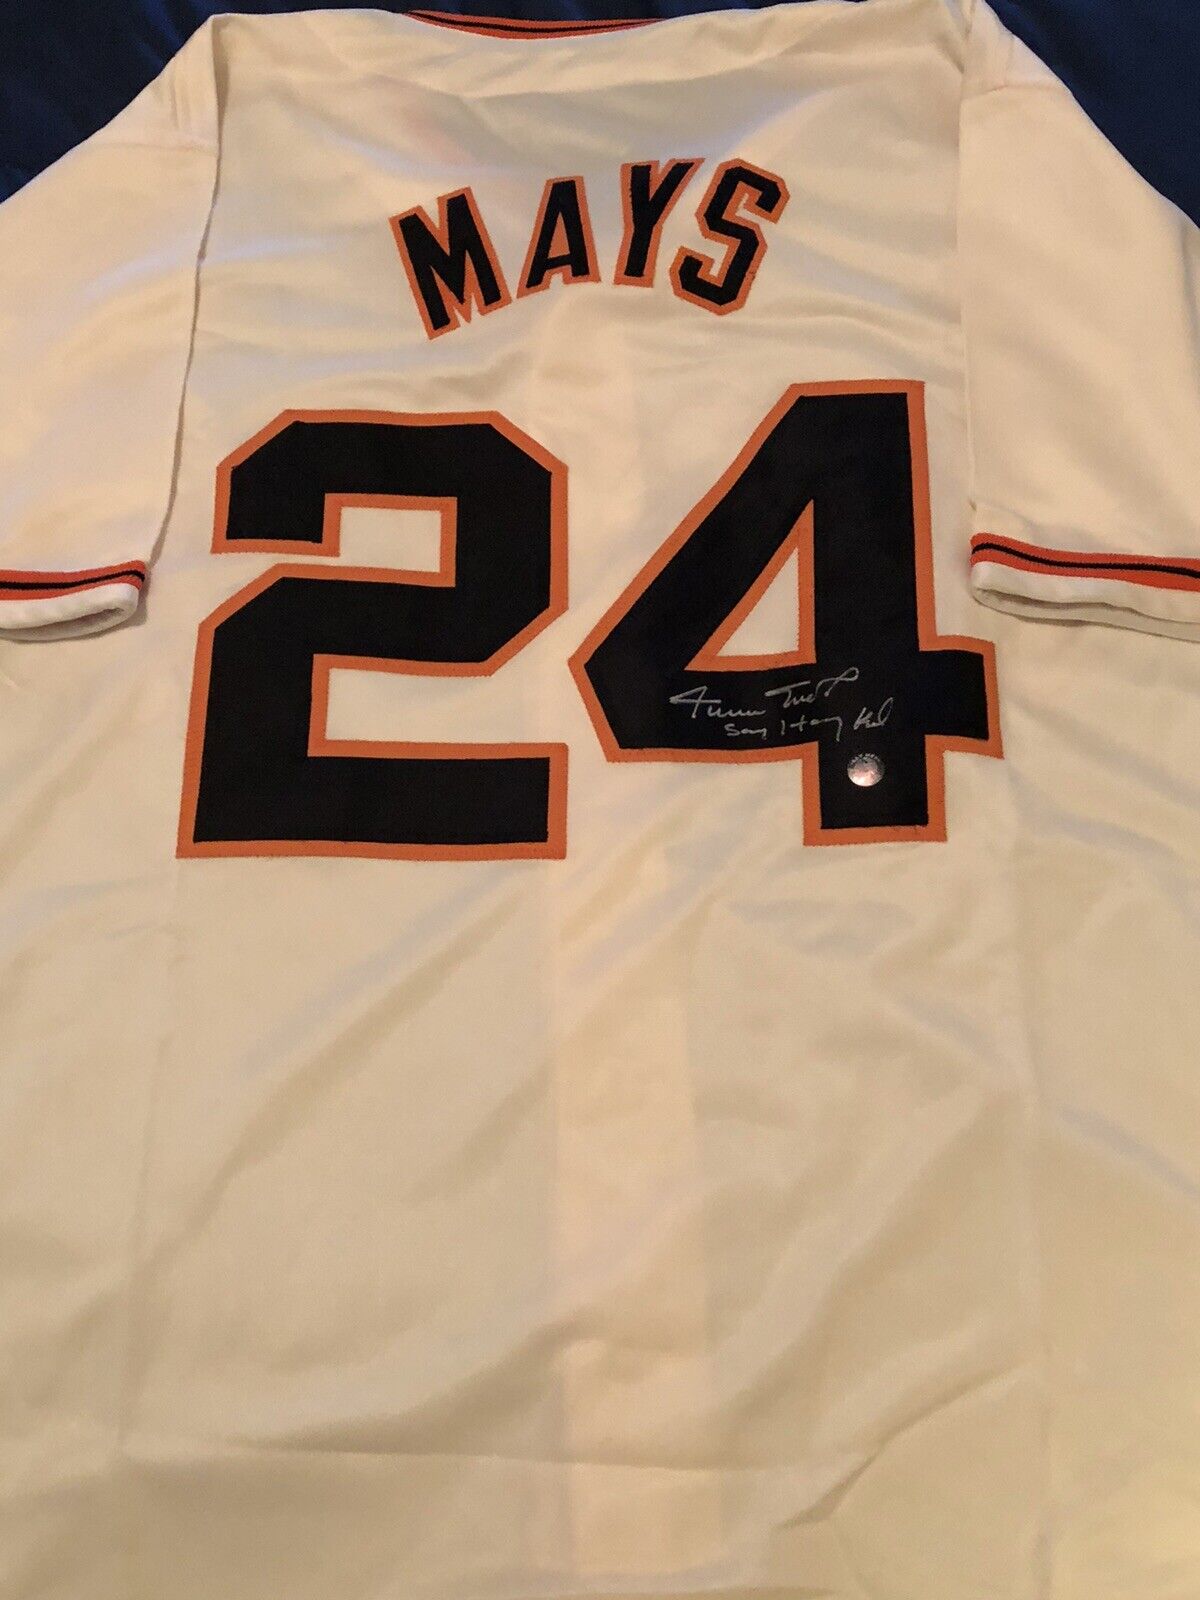 Willie Mays Autographed Home Jersey “Say Hey Kid” Inscription, Mays Hologram